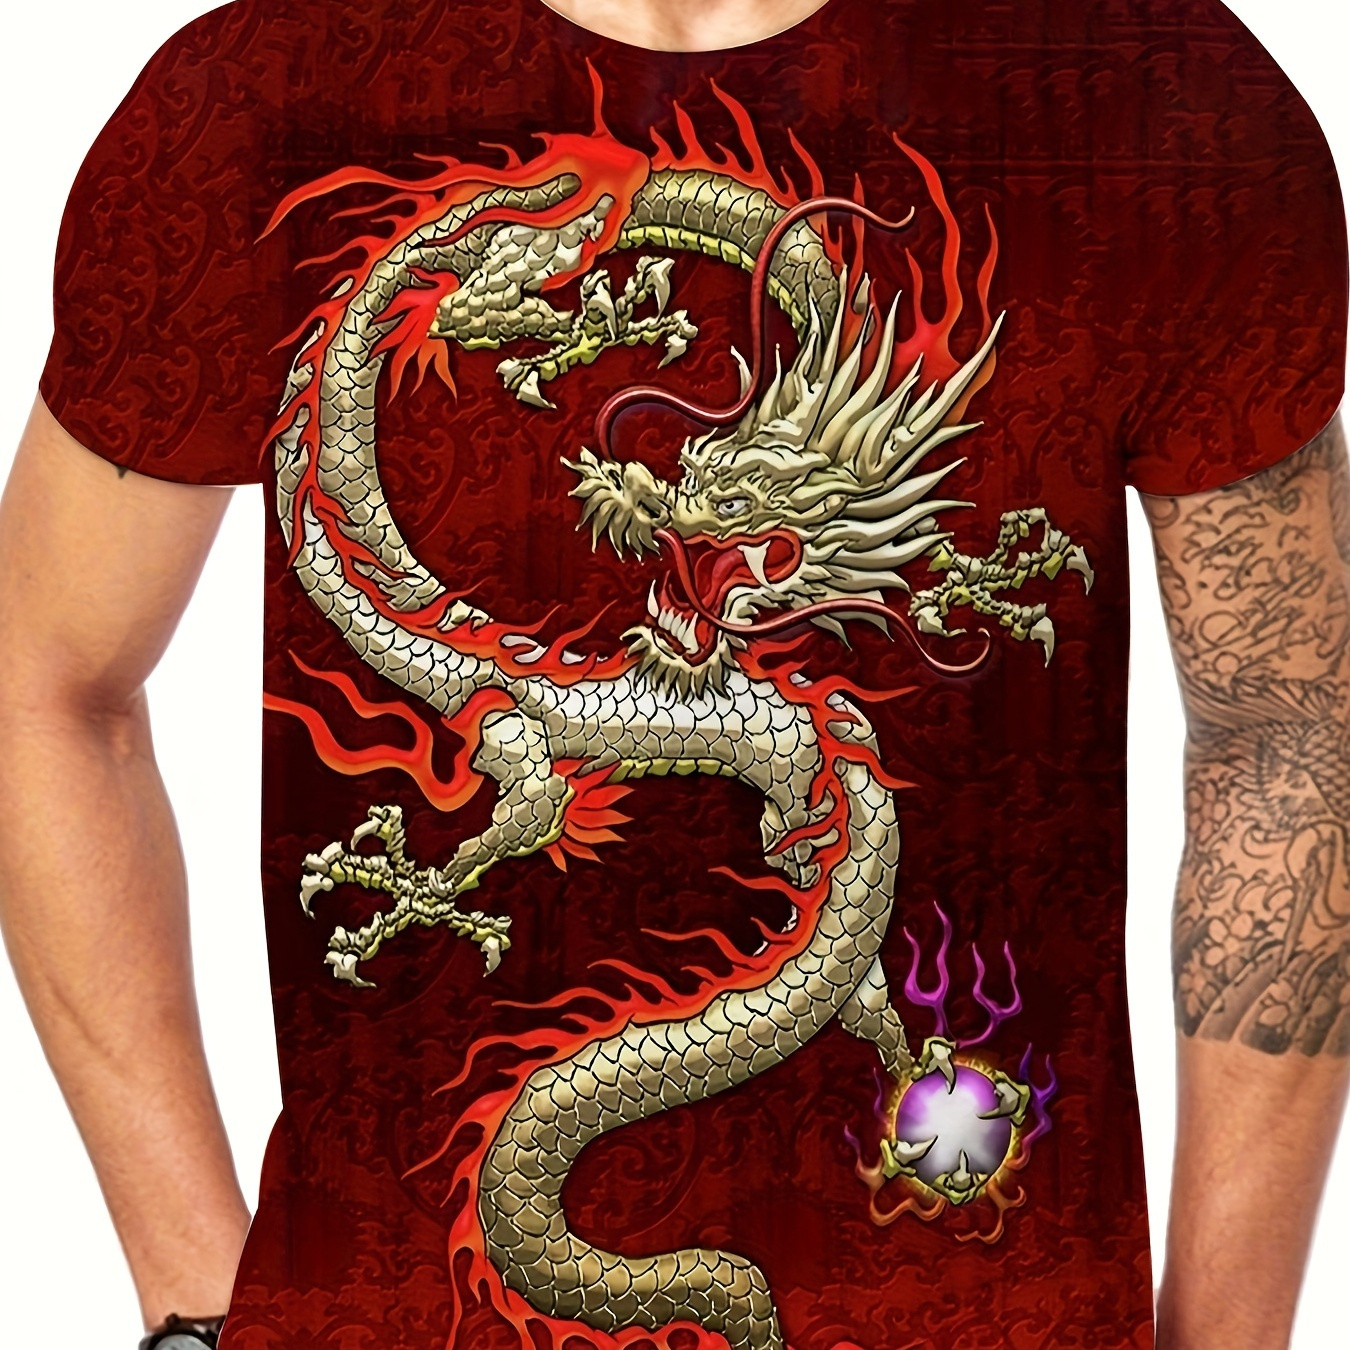 

Dragon Print, Men's Graphic Design Crew Neck Active T-shirt, Casual Comfy Tees Tshirts For Summer, Men's Clothing Tops For Daily Gym Workout Running